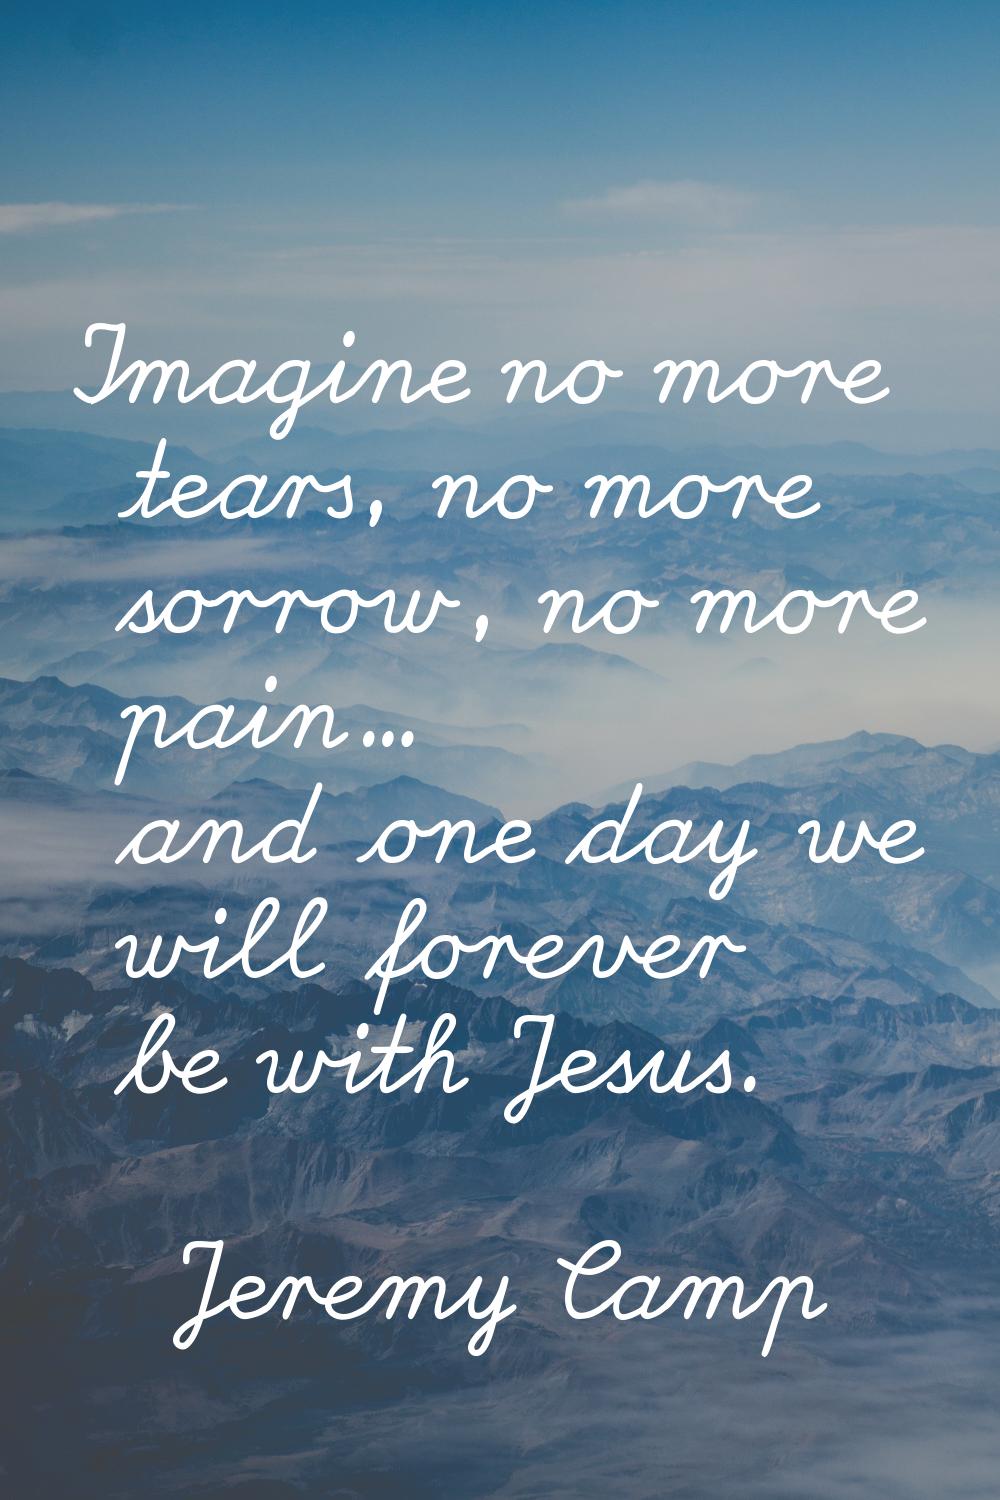 Imagine no more tears, no more sorrow, no more pain... and one day we will forever be with Jesus.